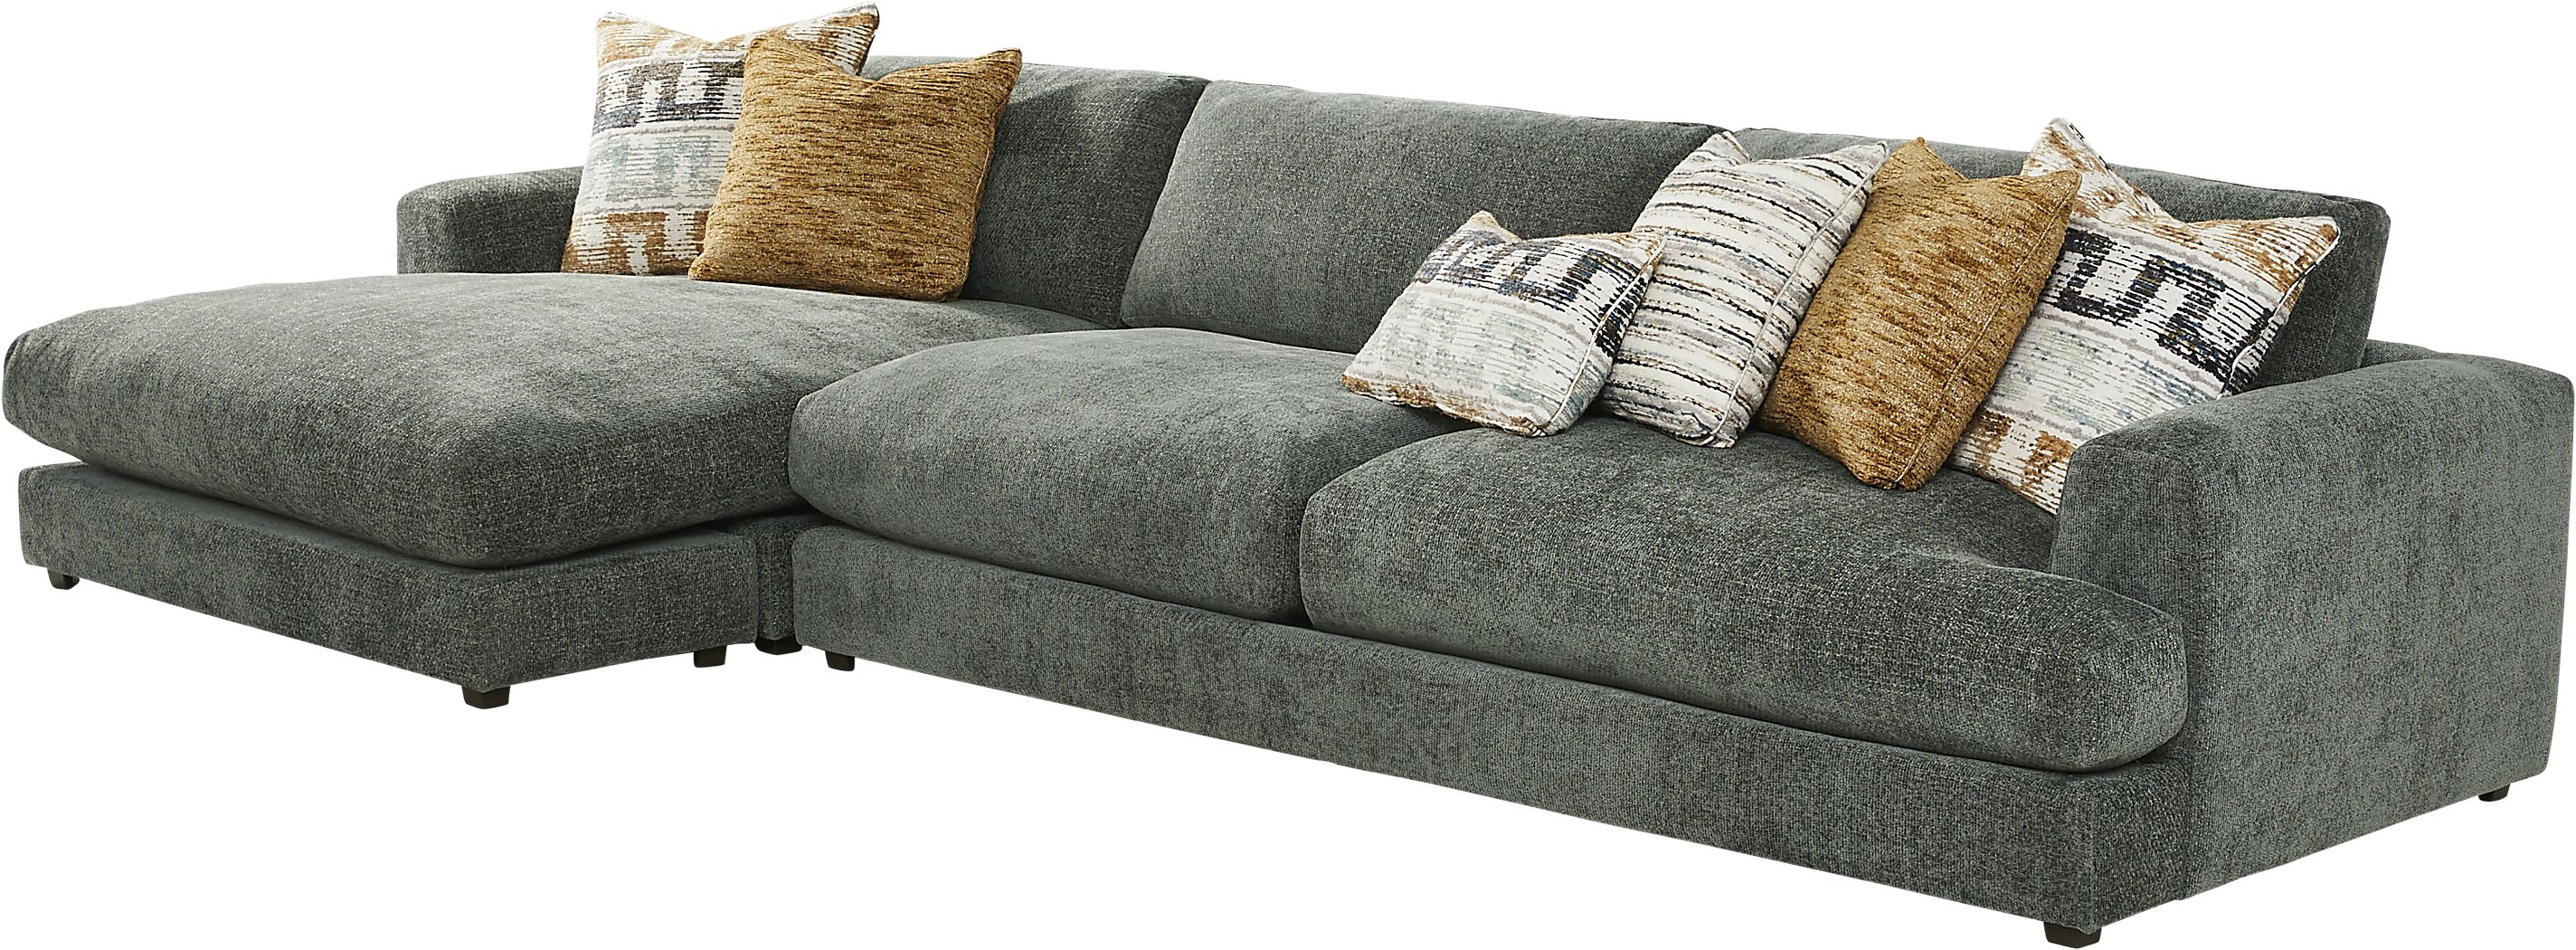 Montecito Charcoal 2 Pc Sectional